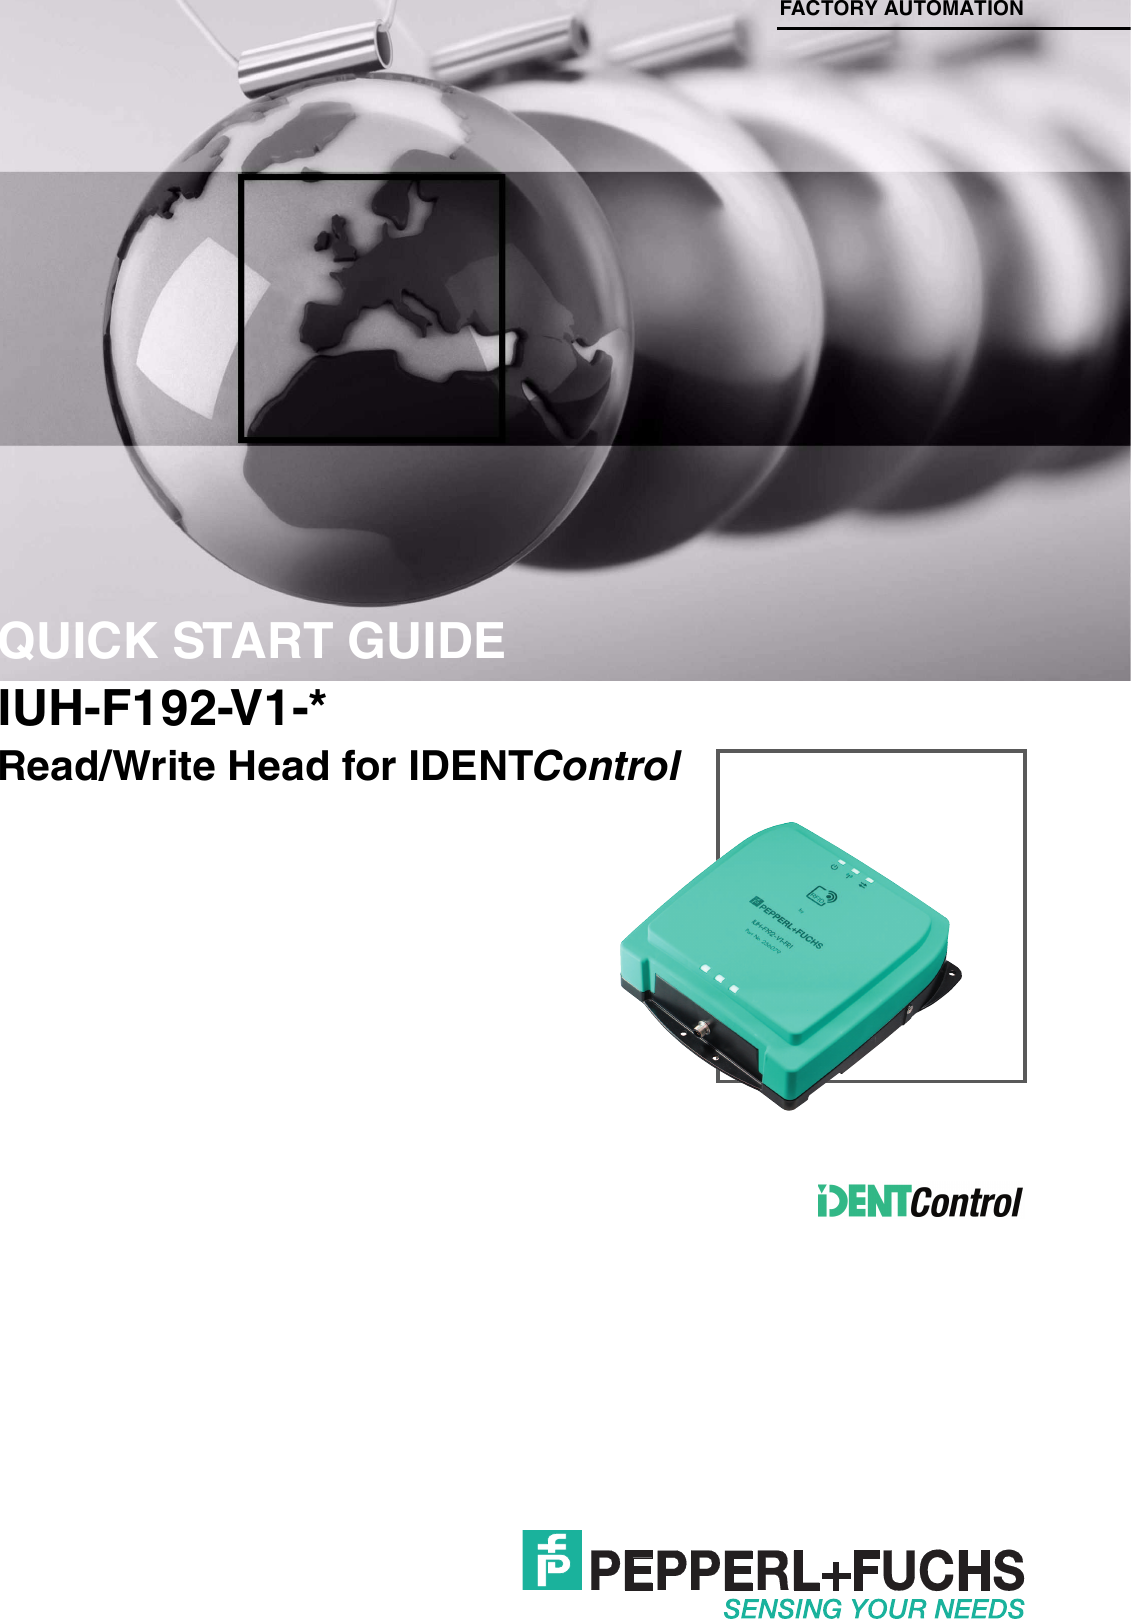 IUH-F192-V1-*Read/Write Head for IDENTControlFACTORY AUTOMATIONQUICK START GUIDE